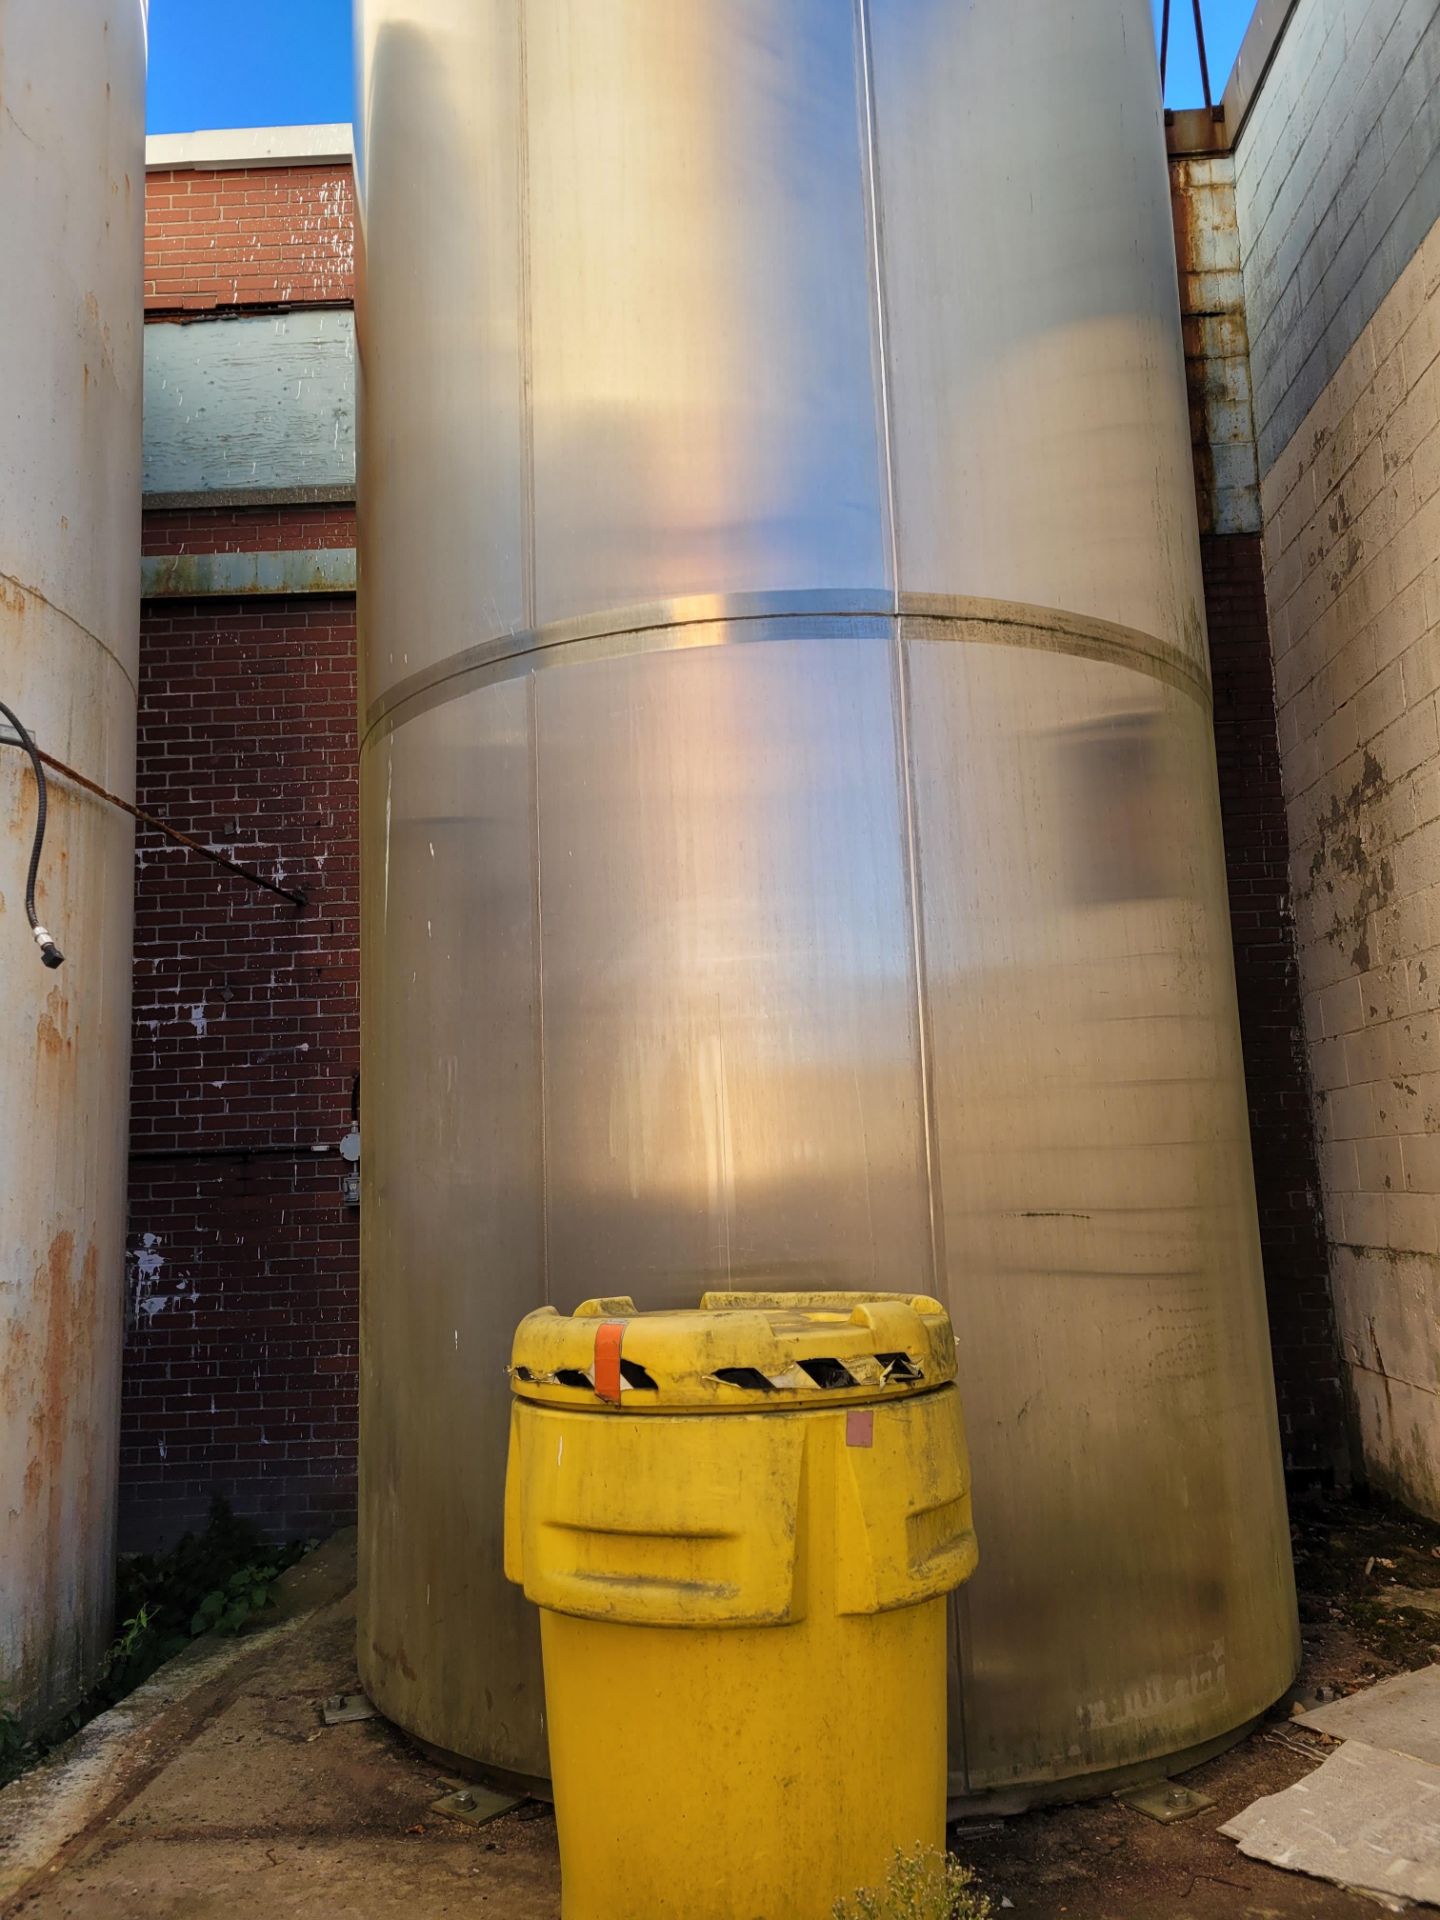 FELDMEIER 6500 gallon all stainless vertical jacketed storage tank, gallons based upon noted capaci - Image 8 of 8